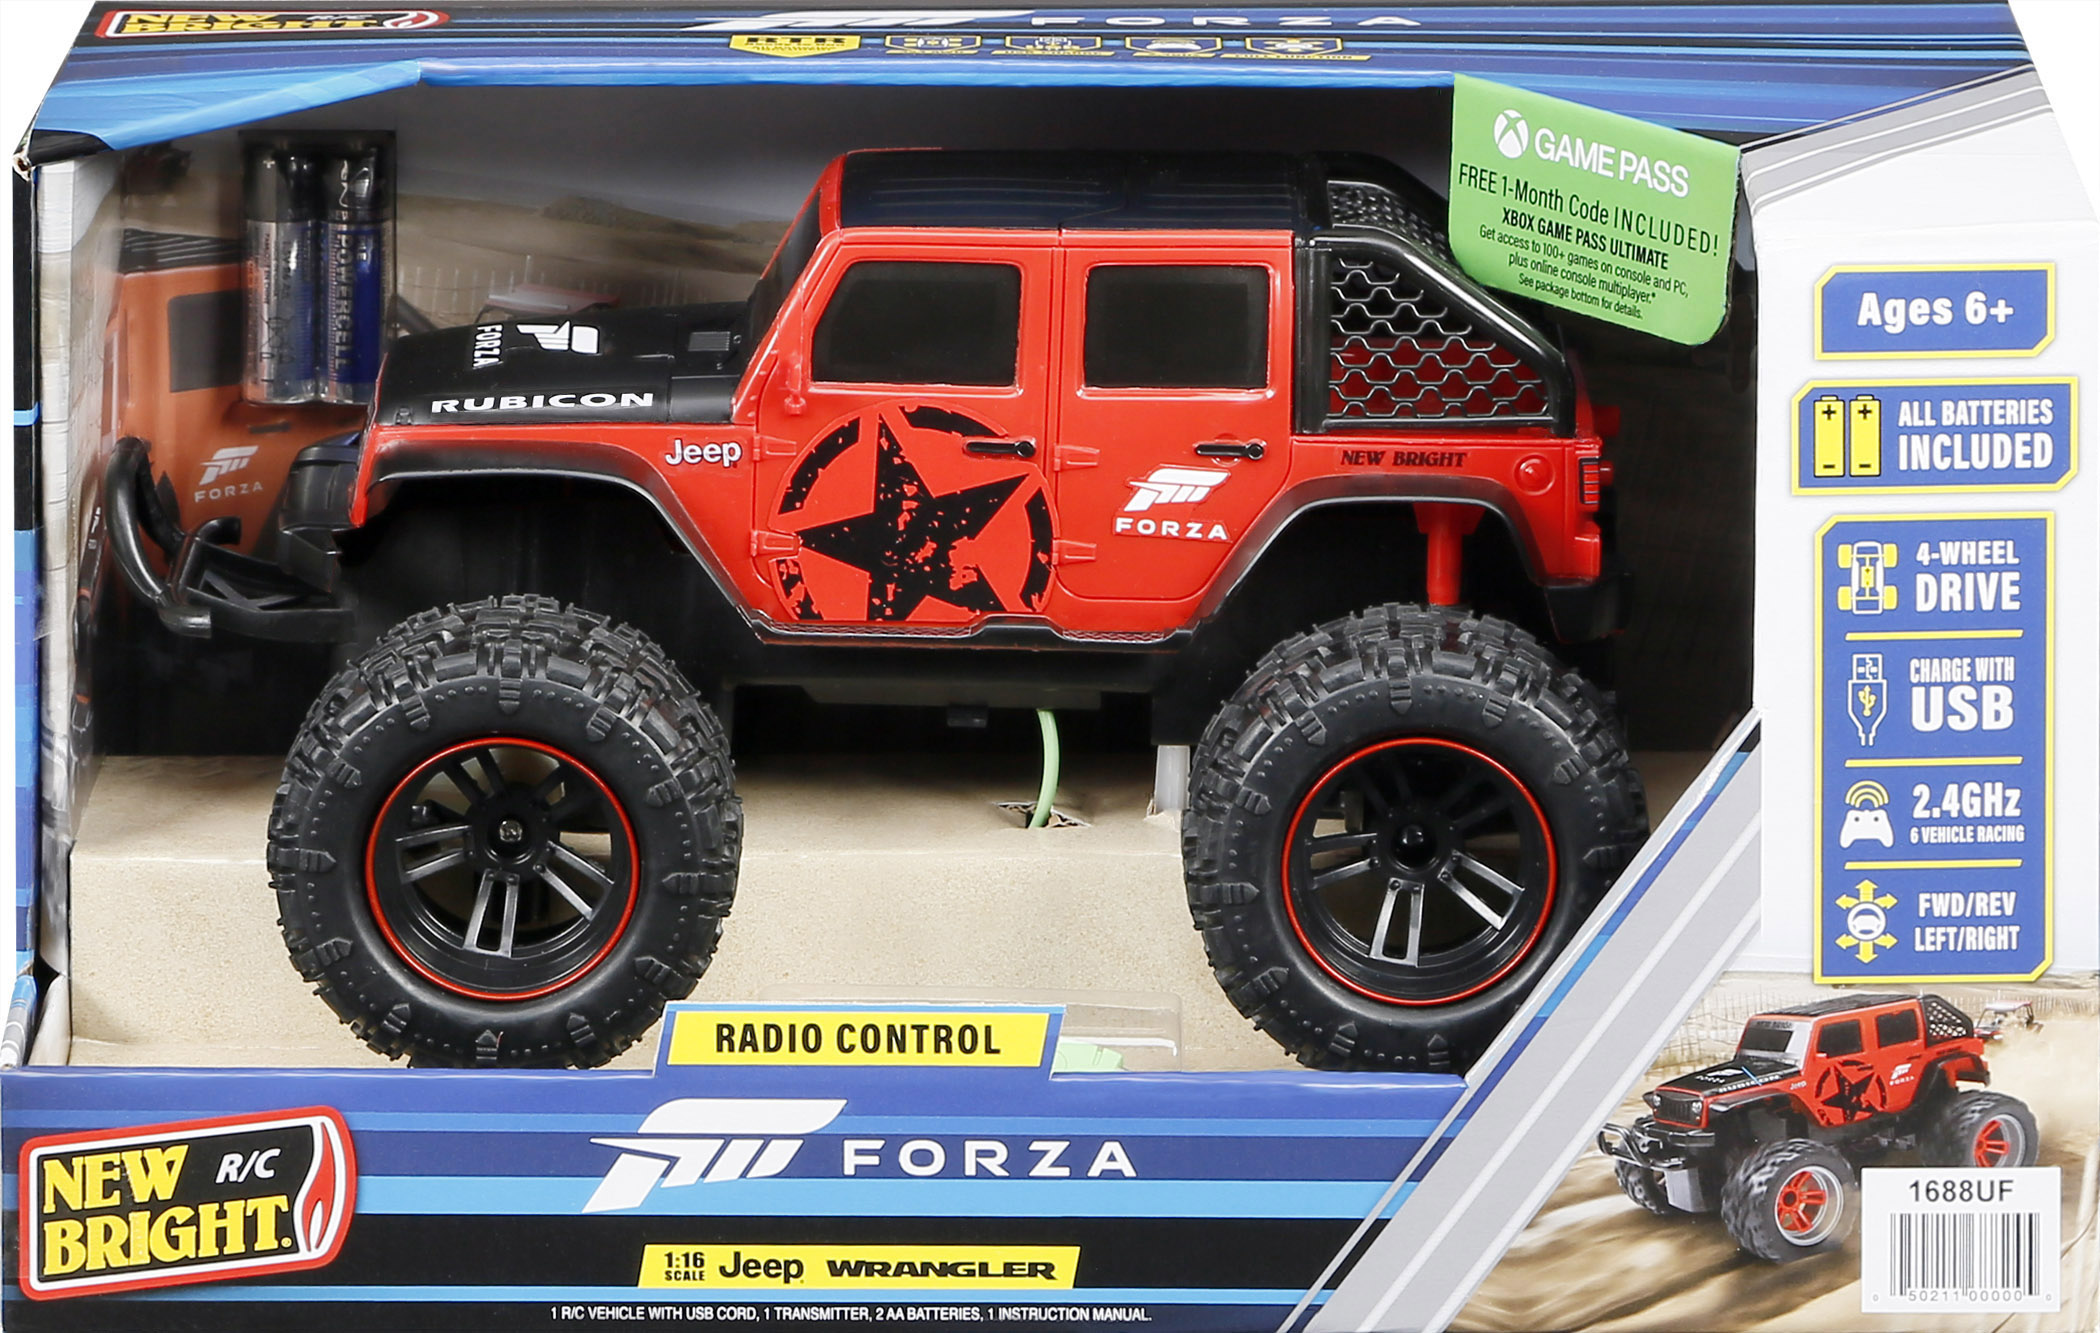 New Bright (1:16) Forza Jeep Wrangler Battery Radio Control Red/Black Truck, 1688UF-4RK - image 3 of 10